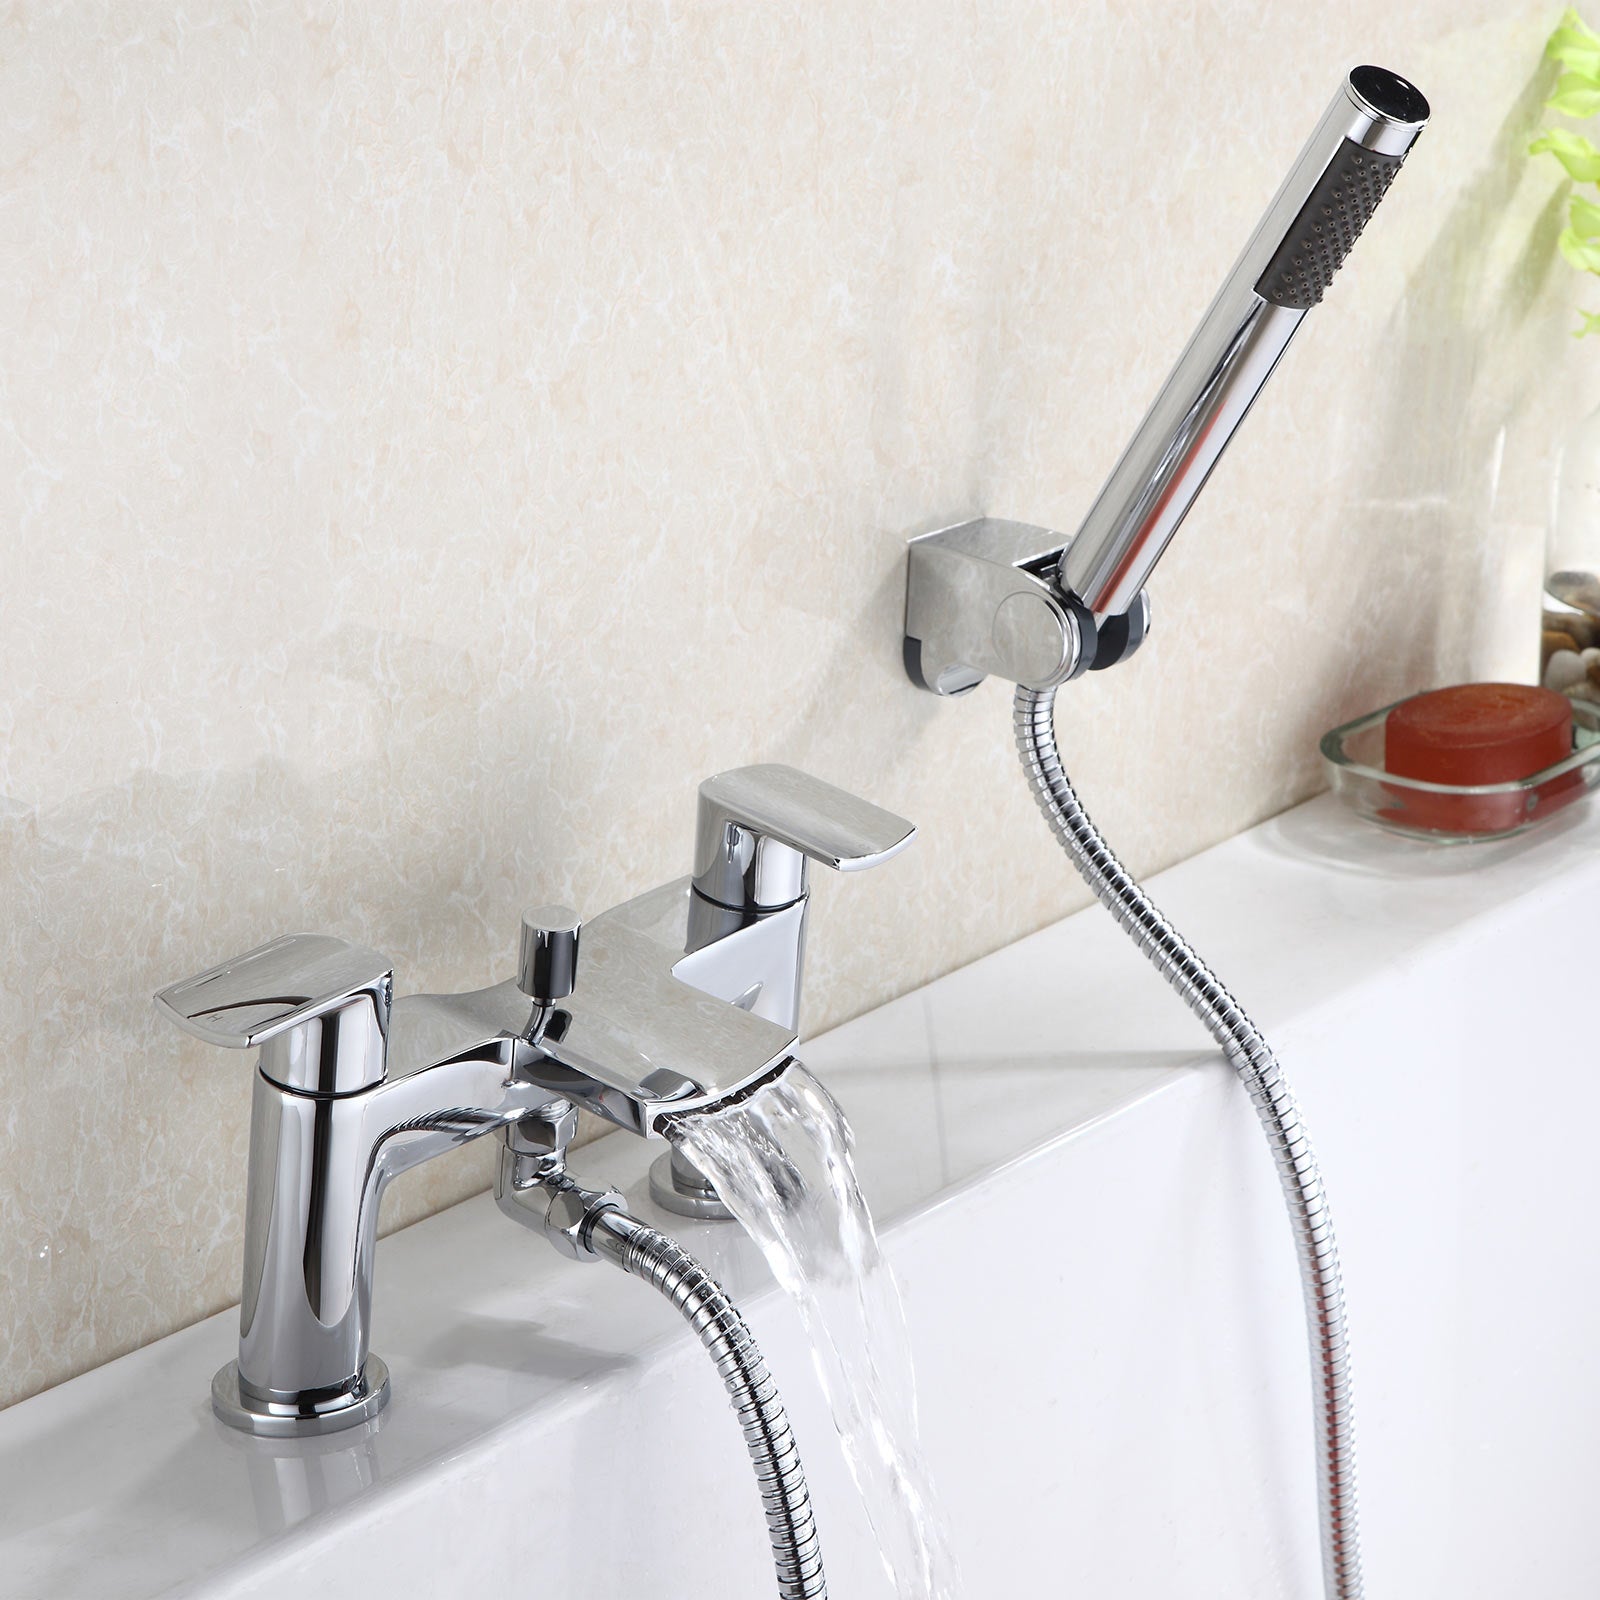 Centa Contemporary Chrome Basin Sink Mixer Tap And Bath Shower Mixer Tap With Pencil Handset Kit